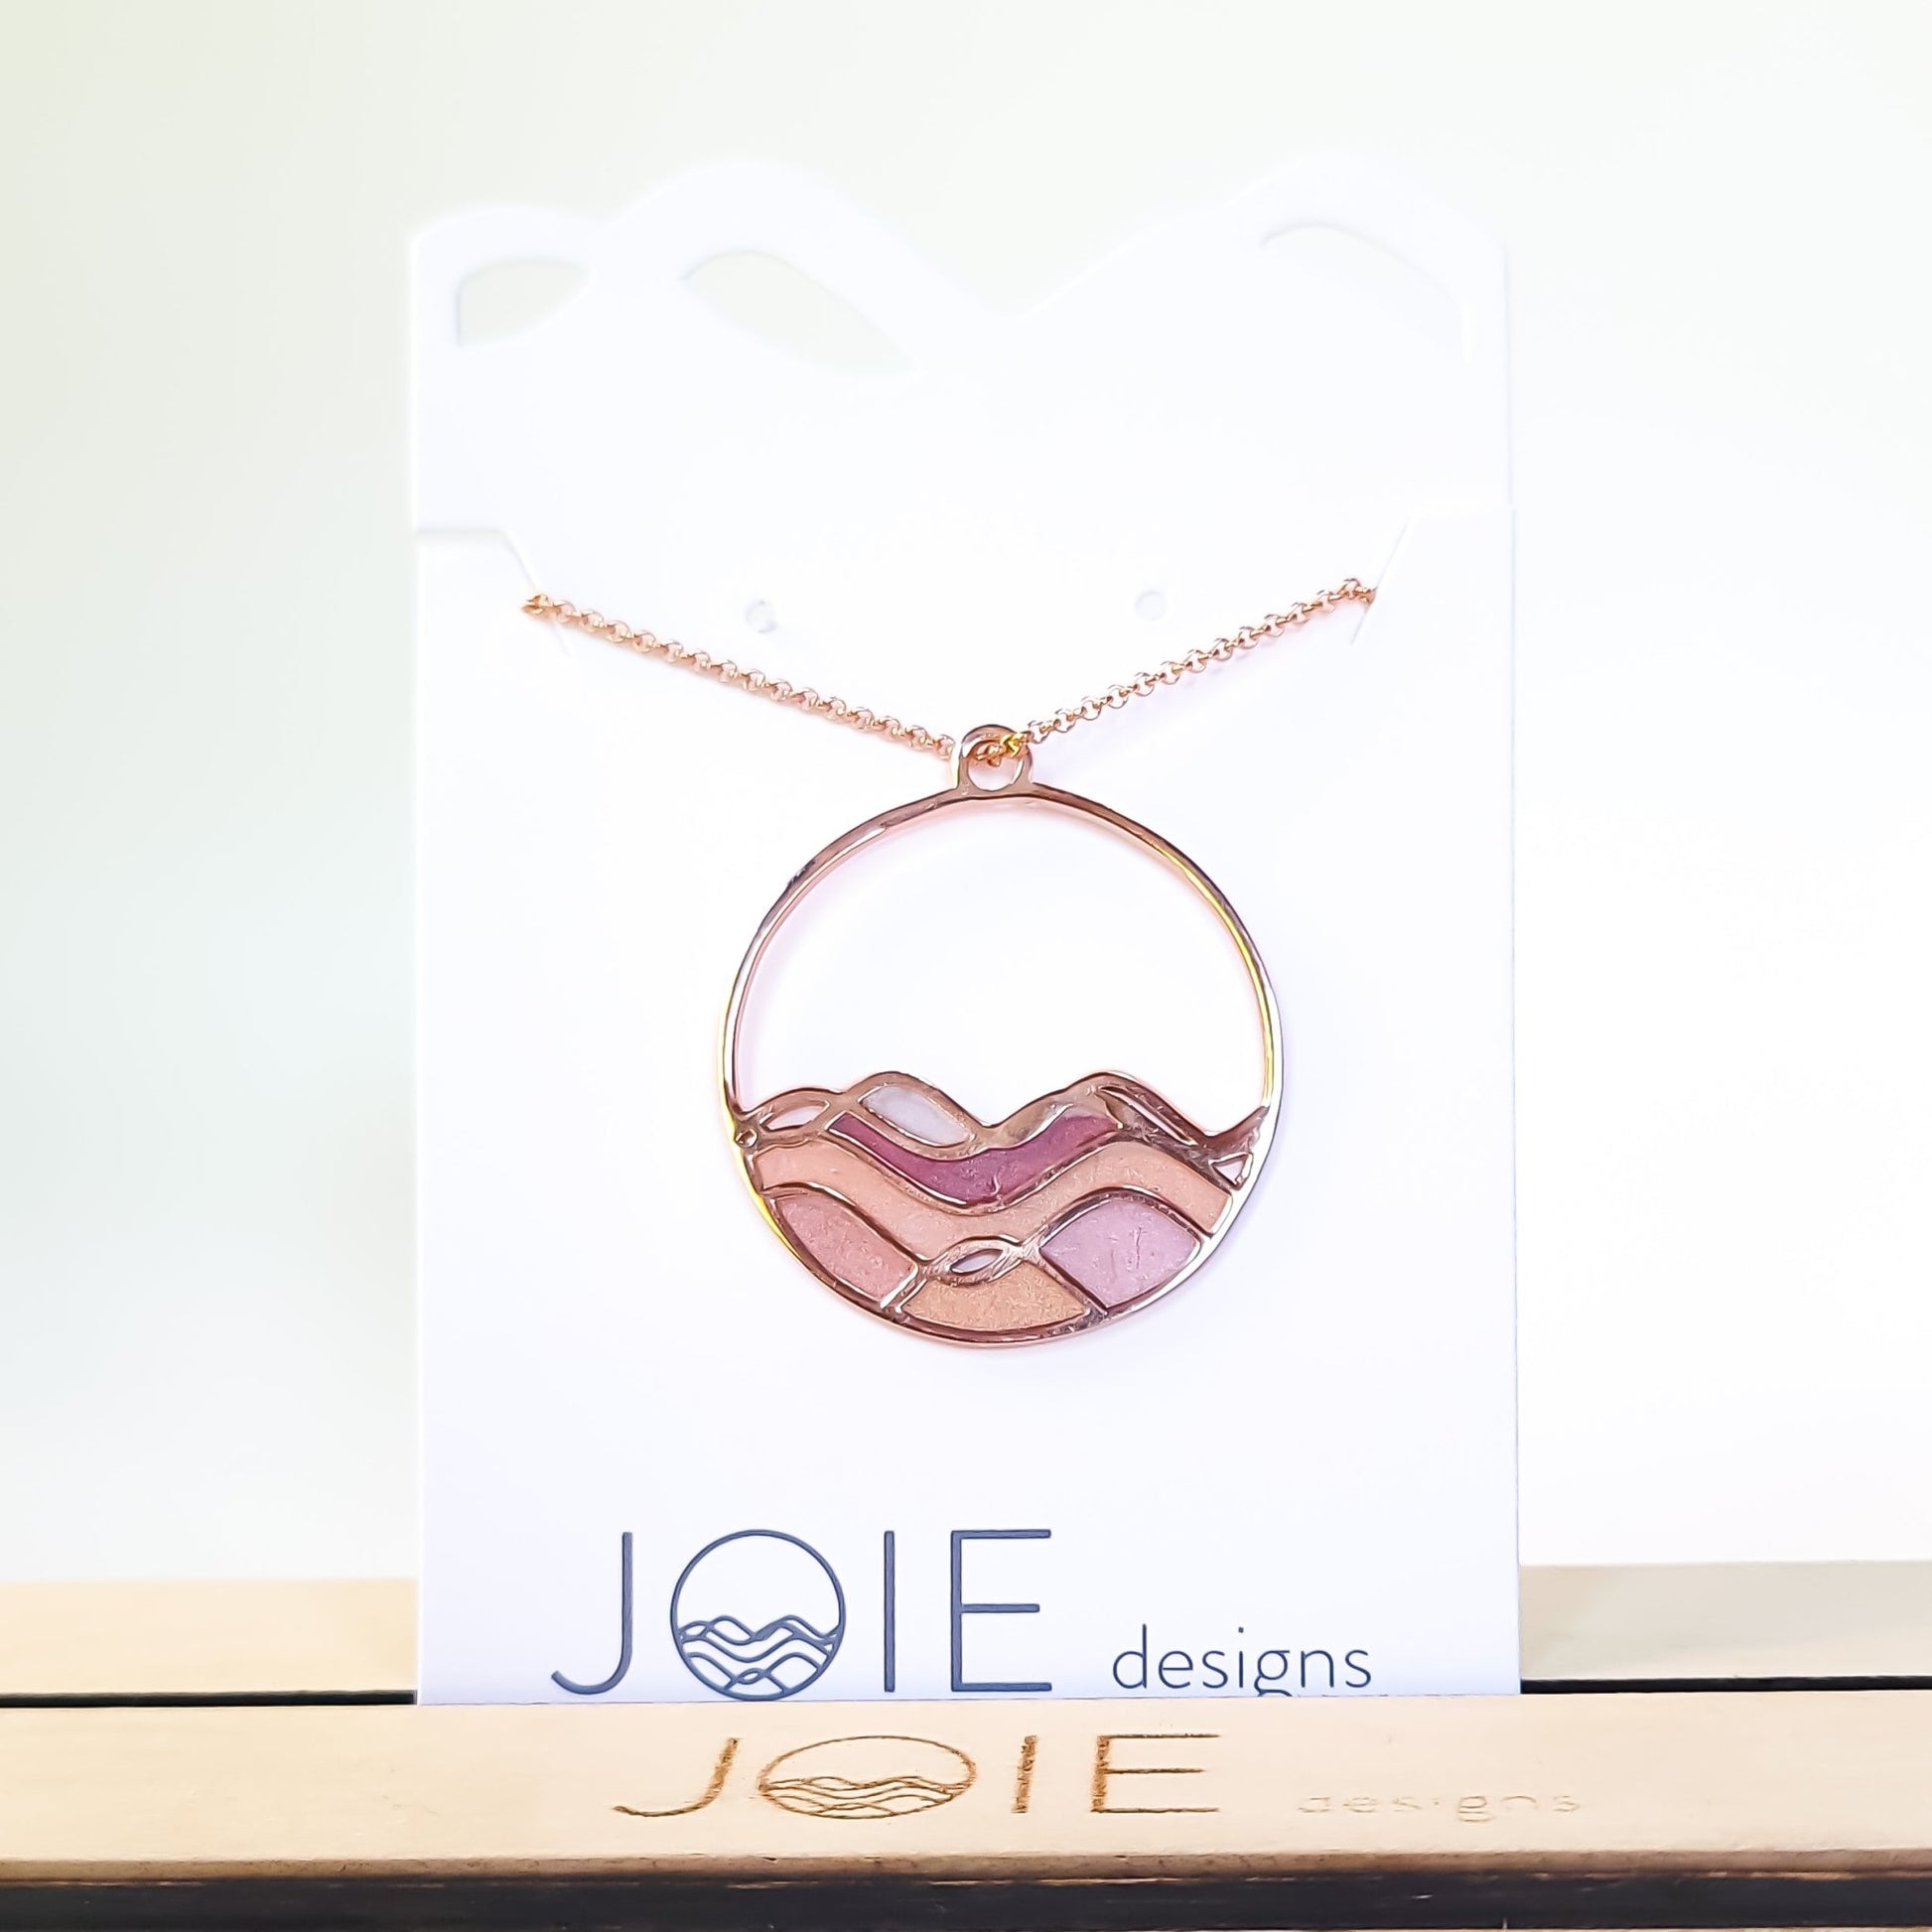 sunset colours on ocean waves rose gold pinks and golds circle necklace close up